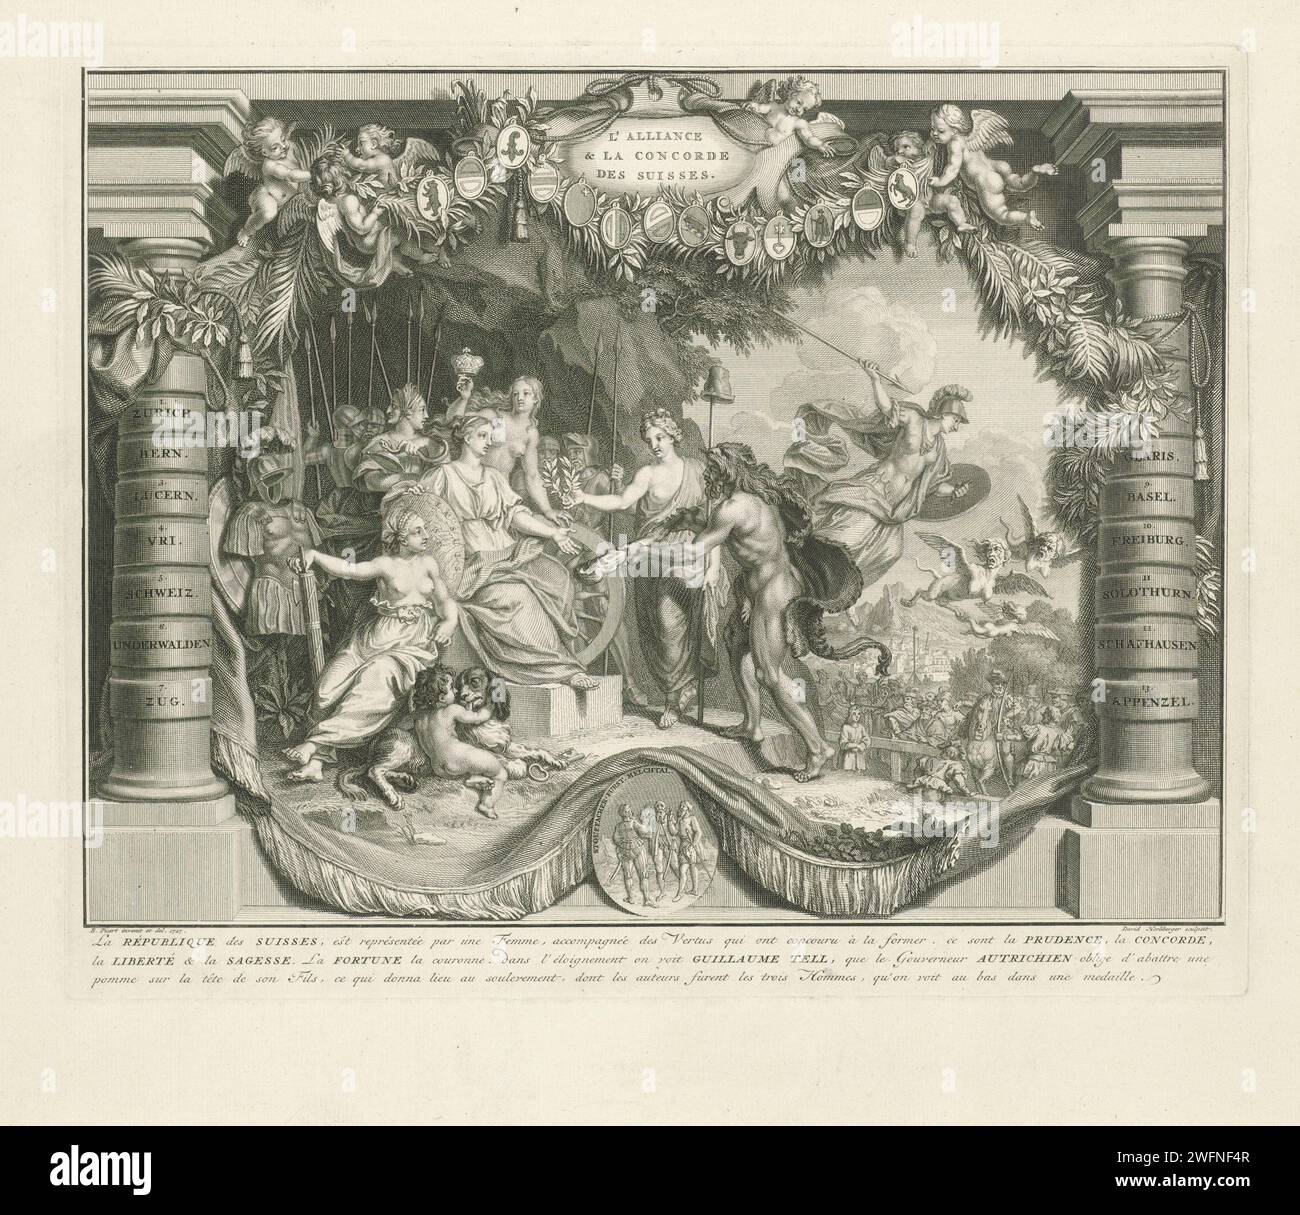 Allegory on the covenant and peace with Switzerland, David Herliberger, After Bernard Picart, 1727 print Hercules offers the personification of the Republic of Switzerland its club. She is surrounded by personifications of the virtues: caution, unity, freedom, wisdom and fortuna. On the right minerva that drives out harpijen. On the right in the background the Swiss crossbowman Willem Tell who was dedicated to shoot an apple from his son's head after he refused to greet the hat that Landvoogd Gessler had put on a stake on the village square as a symbol for the ruling Habsburg . The performance Stock Photo